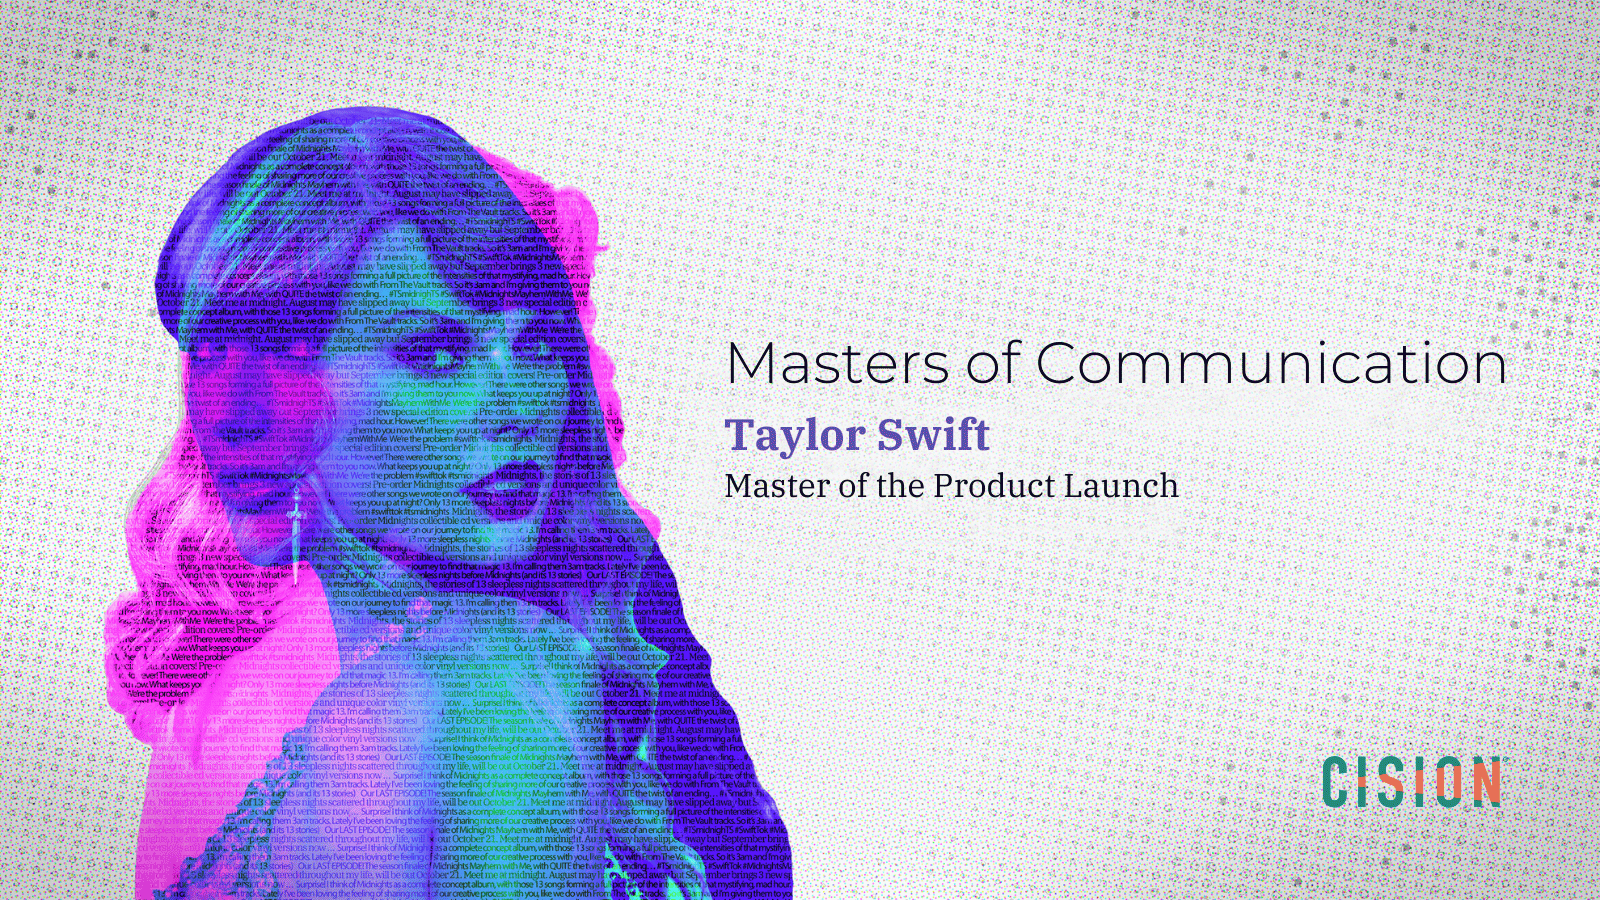 Taylor Swift: Master of the Product Launch